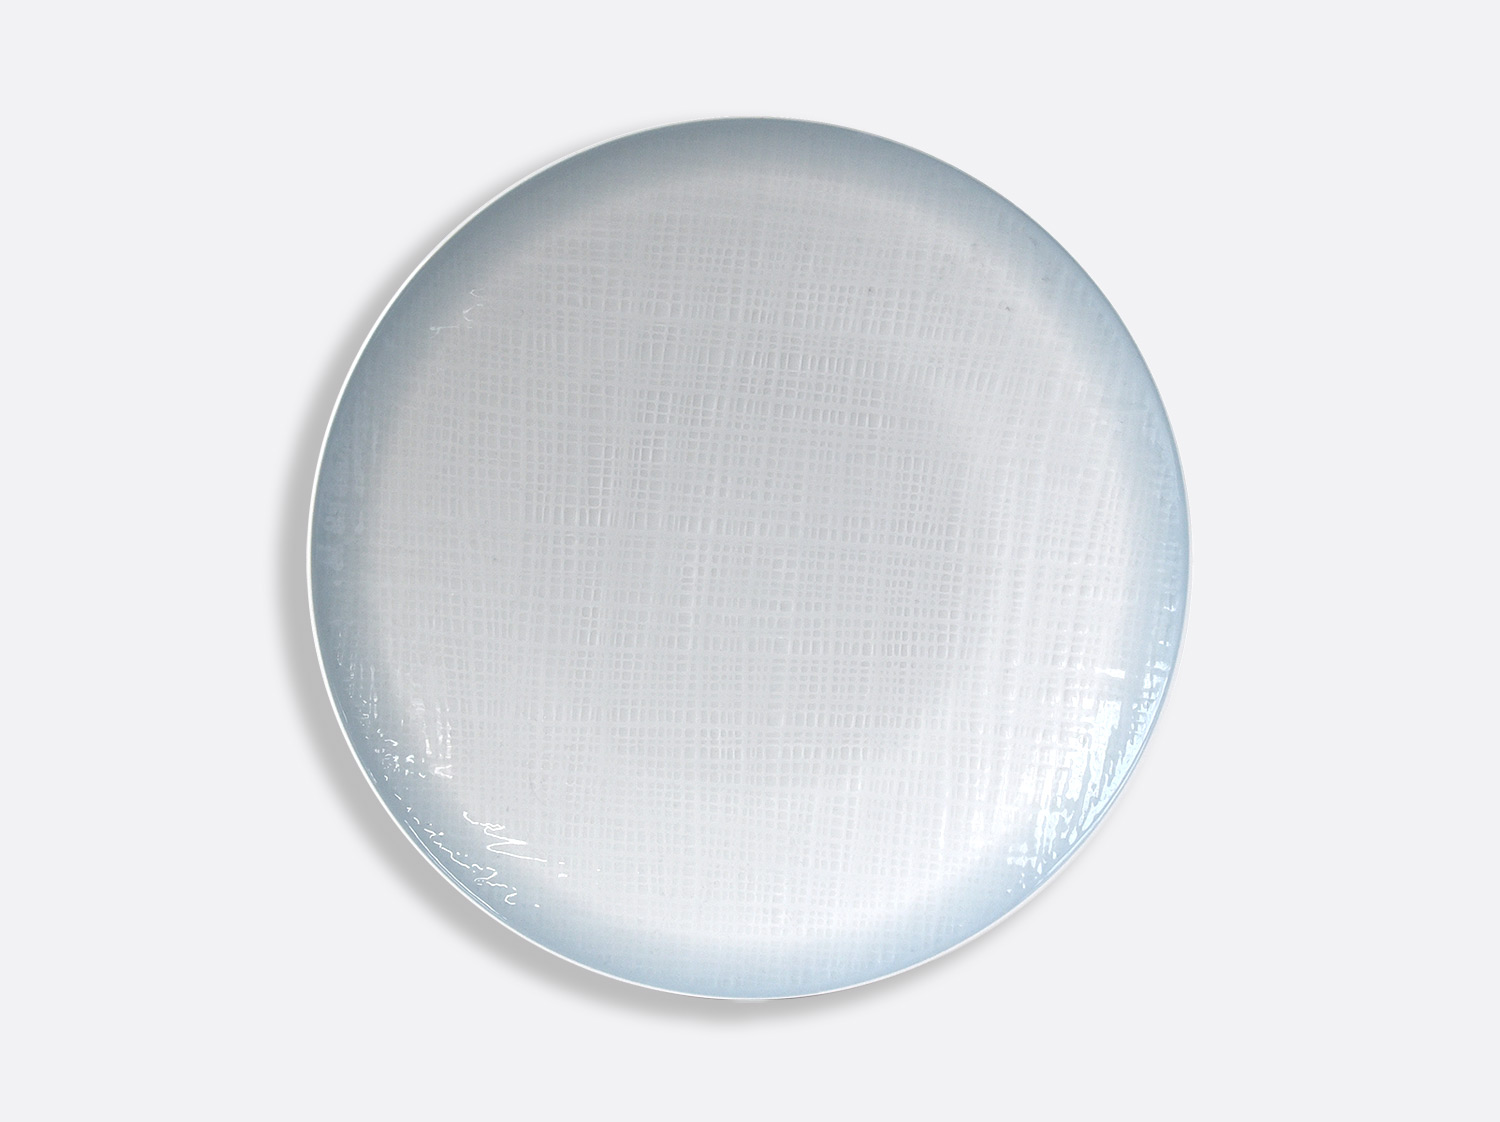 China Coupe plate 26 cm of the collection Eclipse | Bernardaud